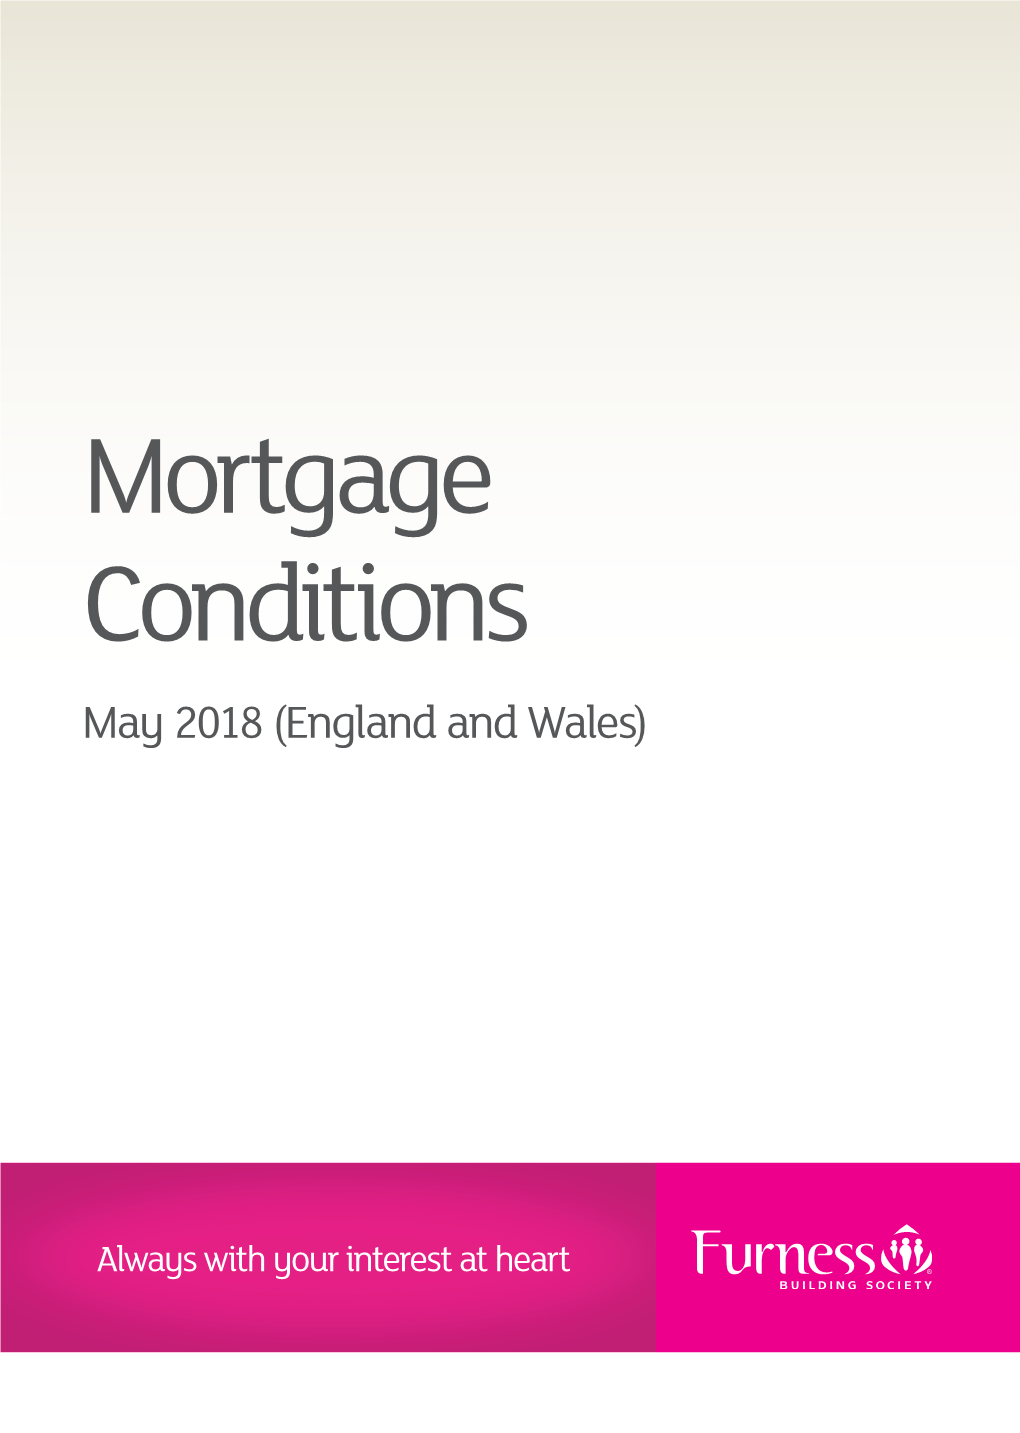 Mortgage Conditions May 2018 (England and Wales)